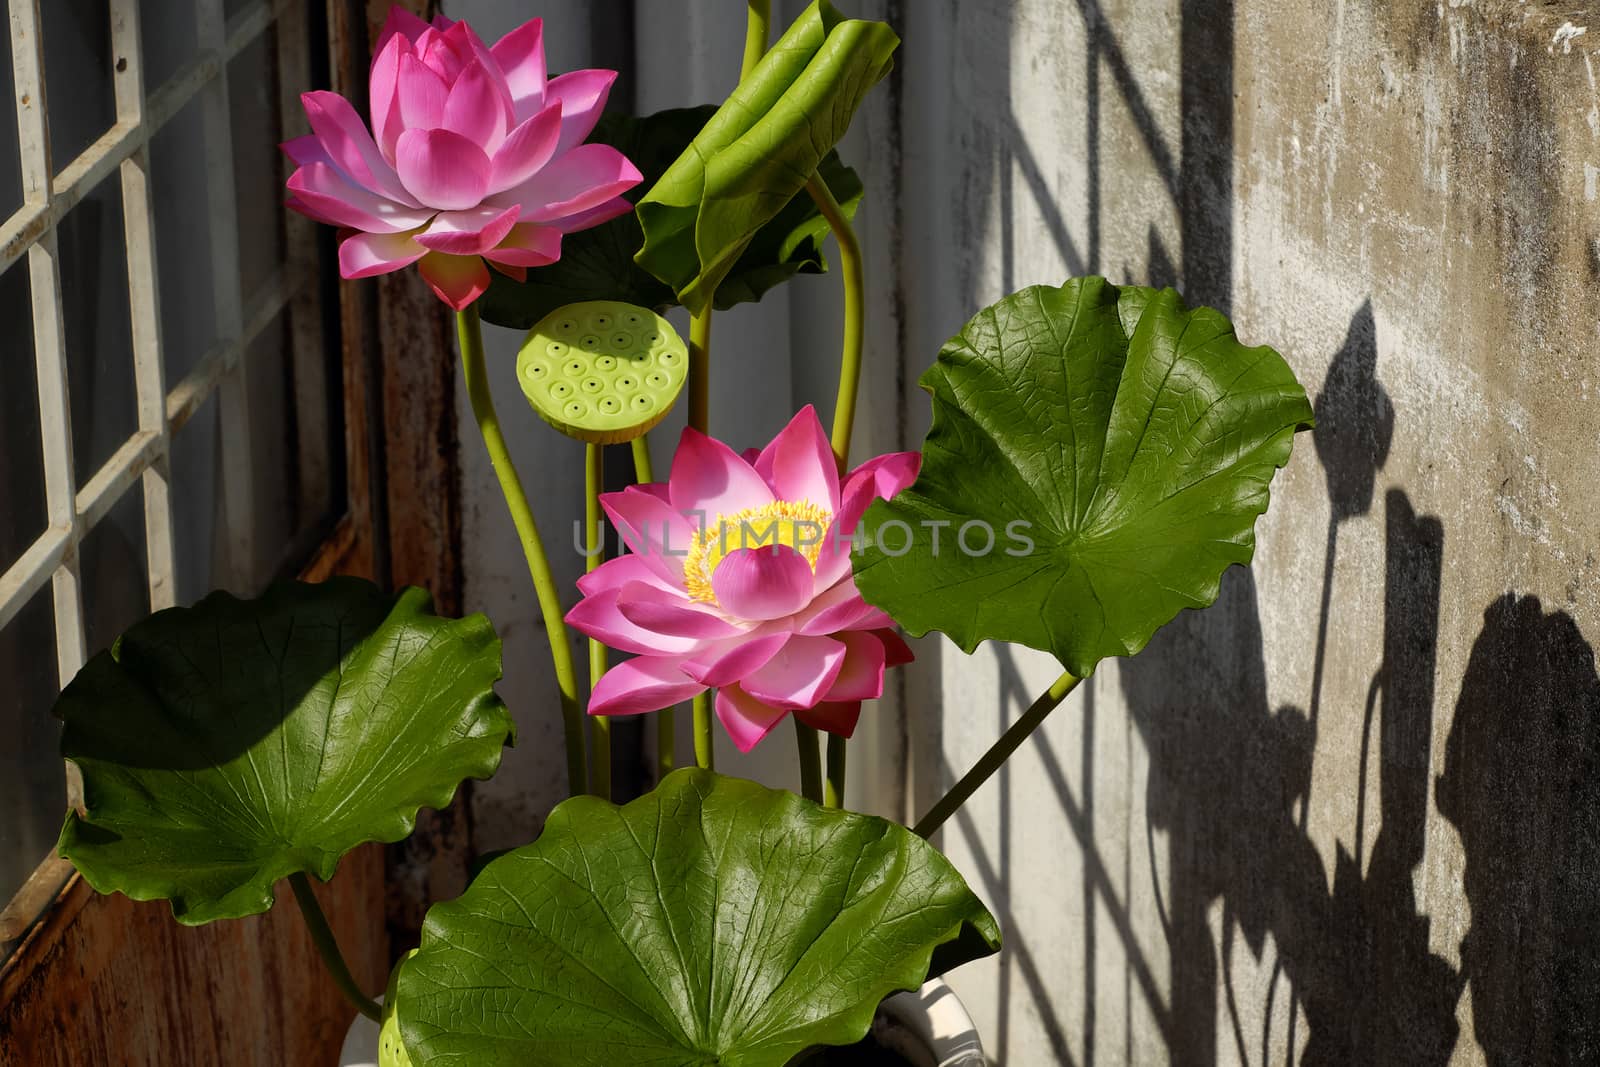 Artificial flower, handmade lotus flower with green leaf and pink petal make from clay, diy art product for home decoration